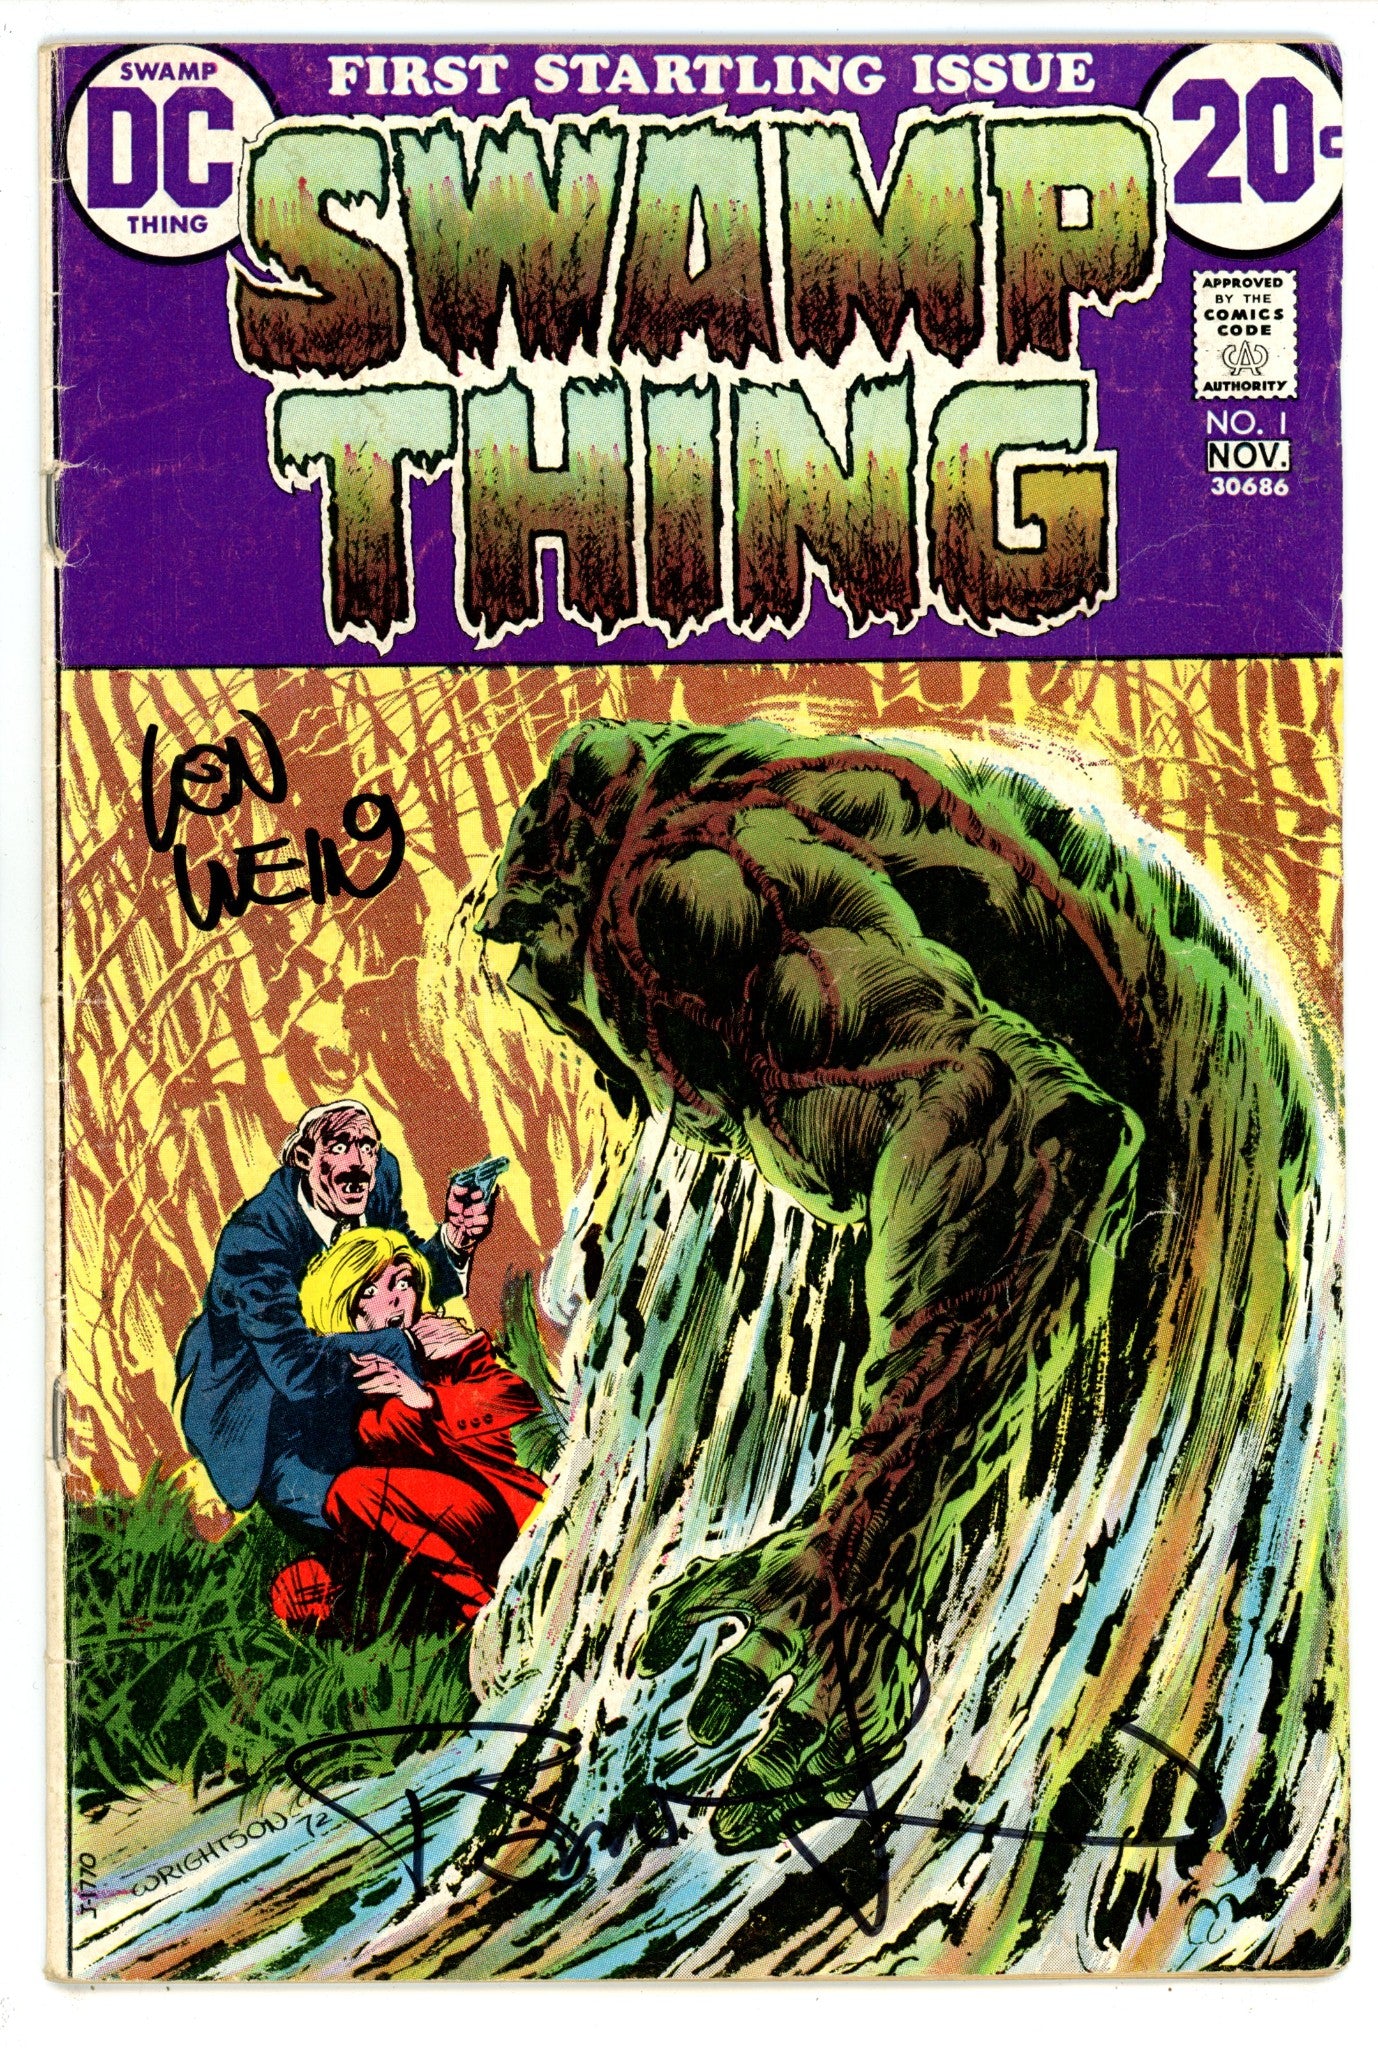 Swamp Thing Vol 1 1 GD/VG (3.0) (1972) Signed x2 Cover Bernie Wrightson & Len Wein 